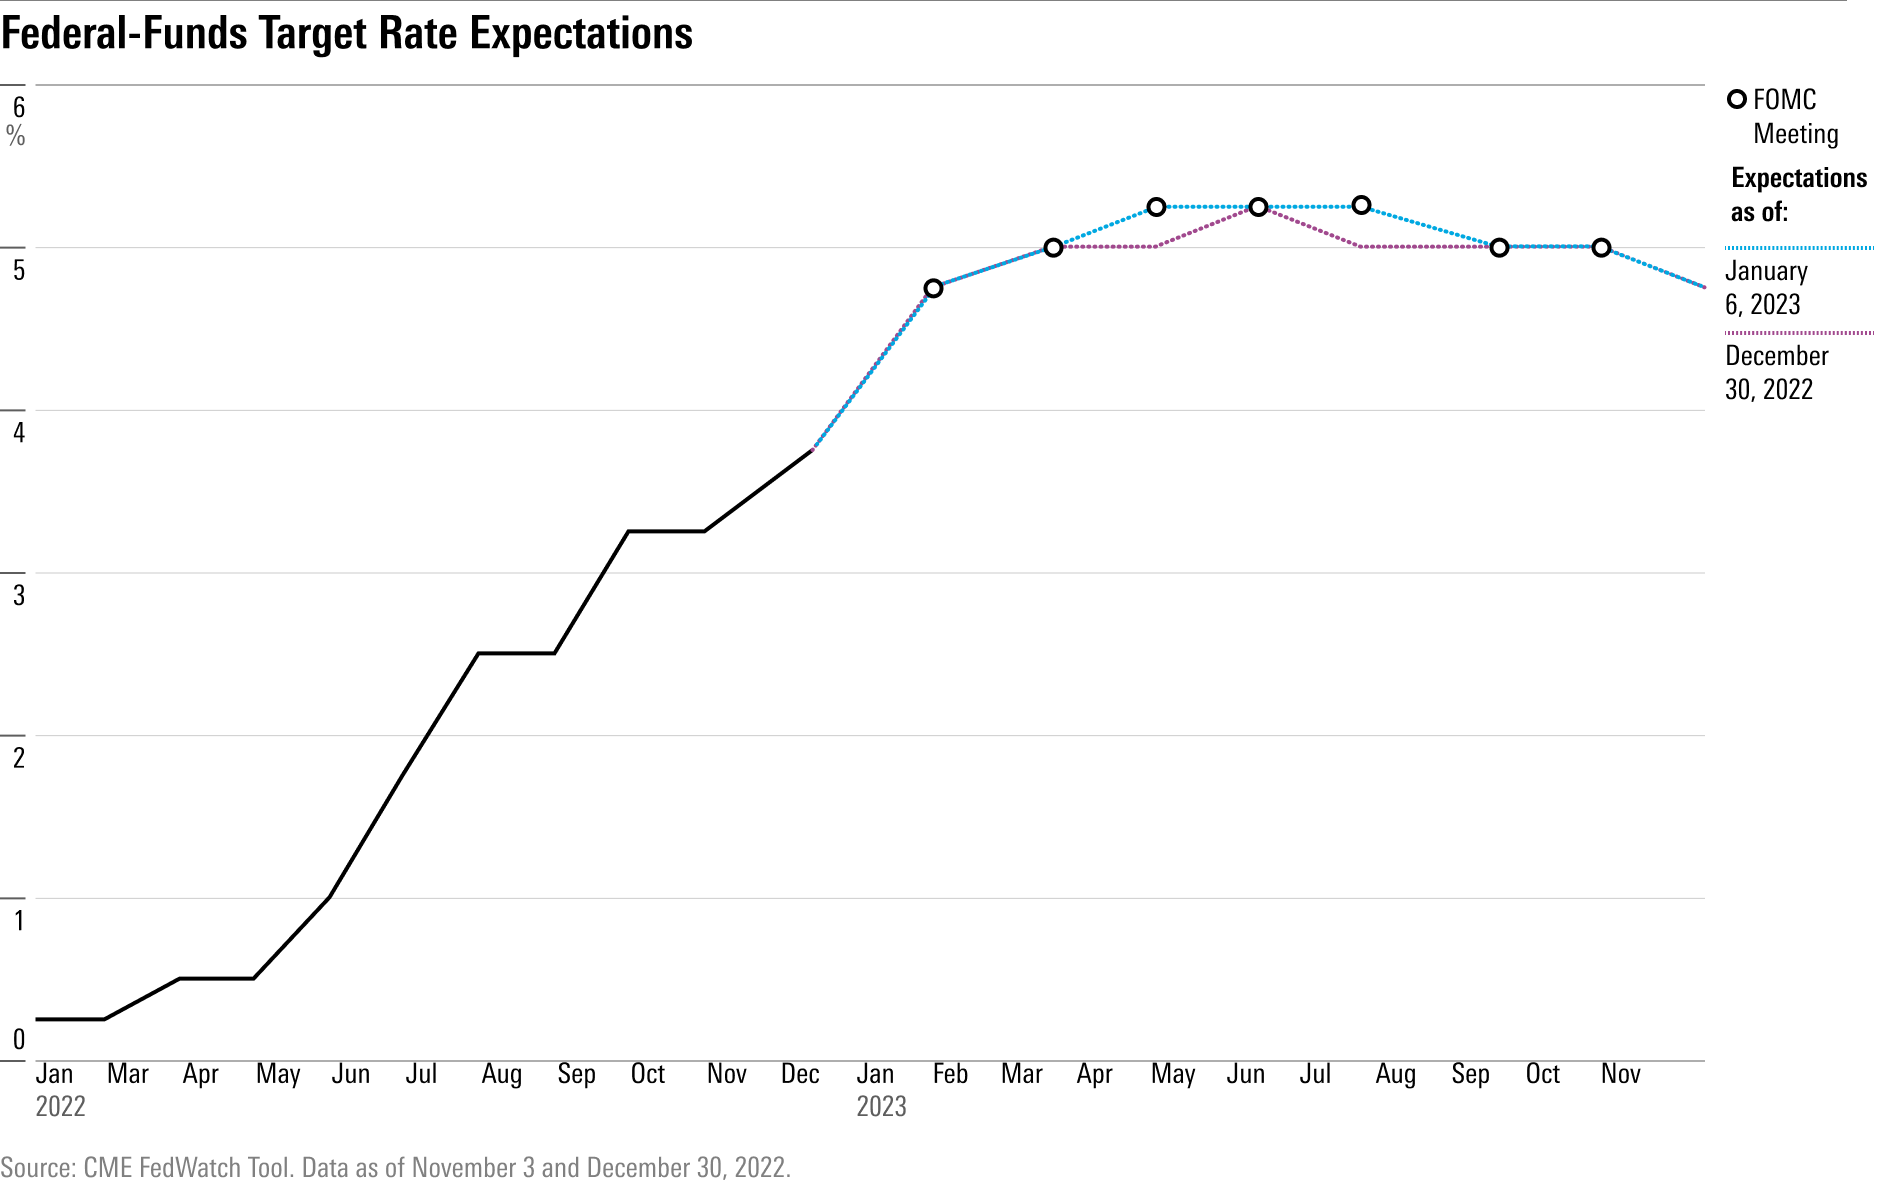 Long-term expectations for federal-funds effective rate targets.